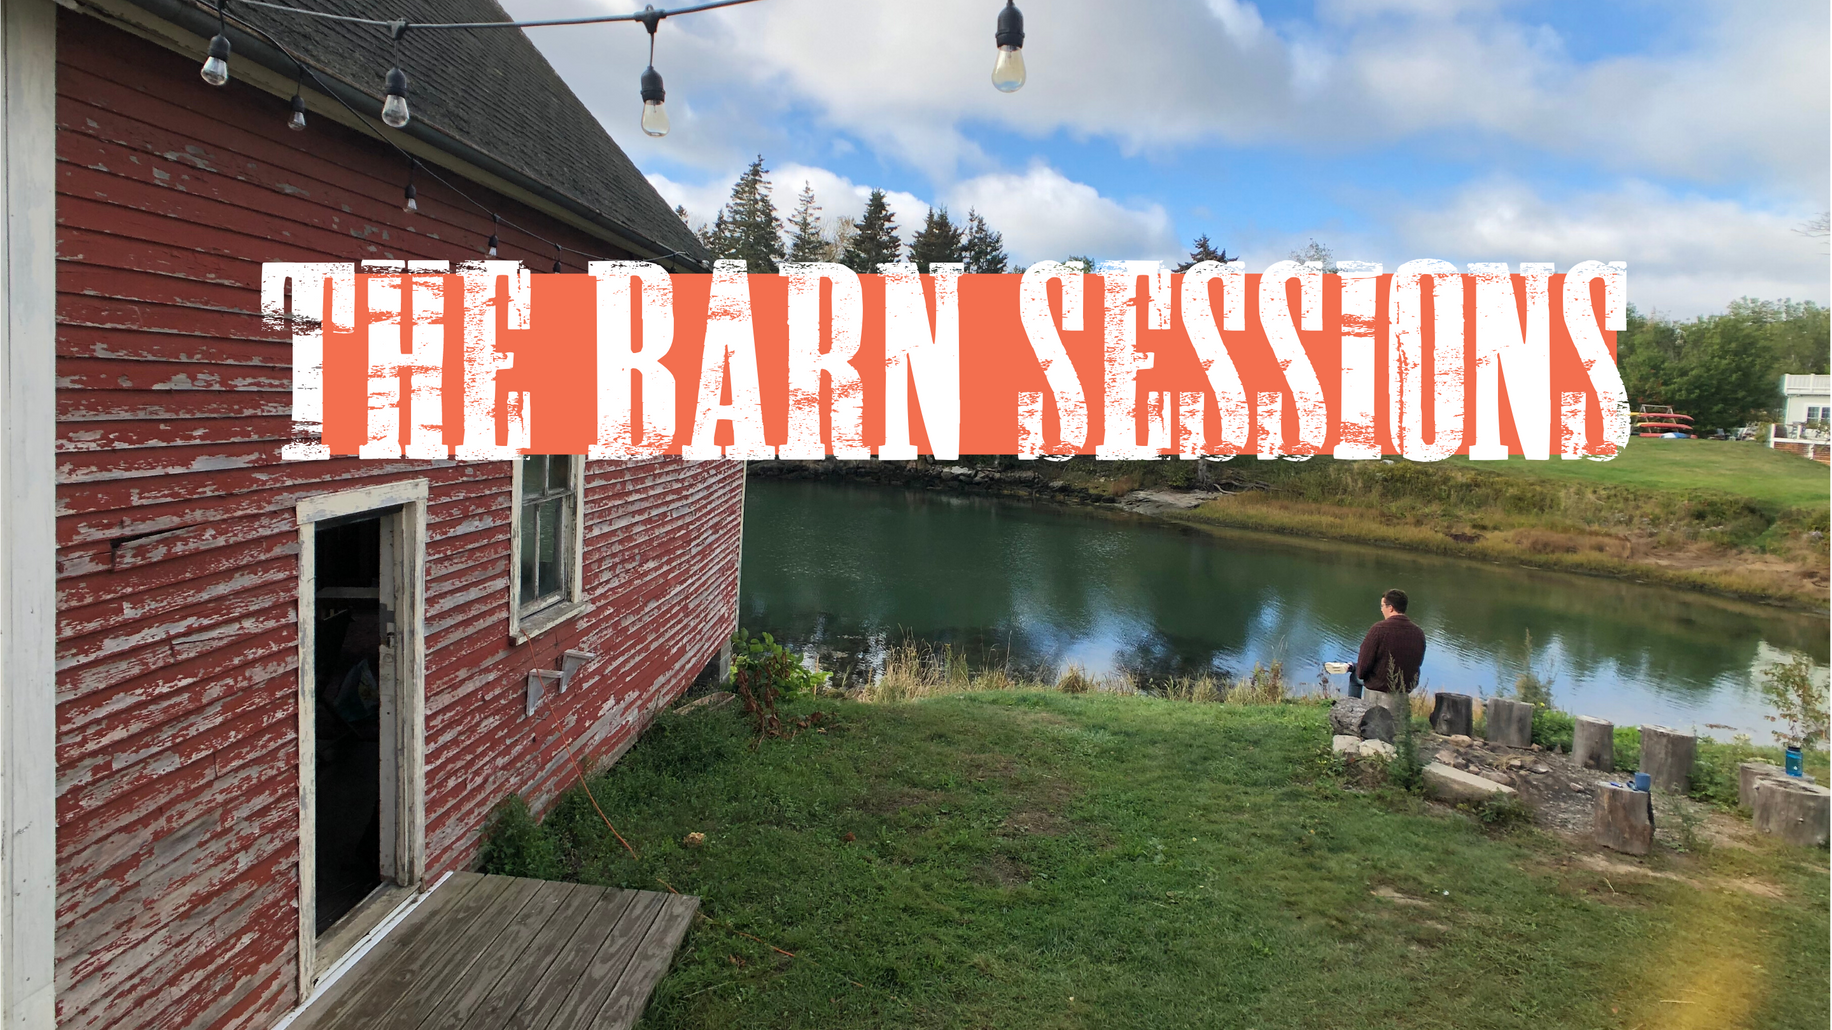 THE BARN SESSIONS // Bass Harbor Maine, 2019